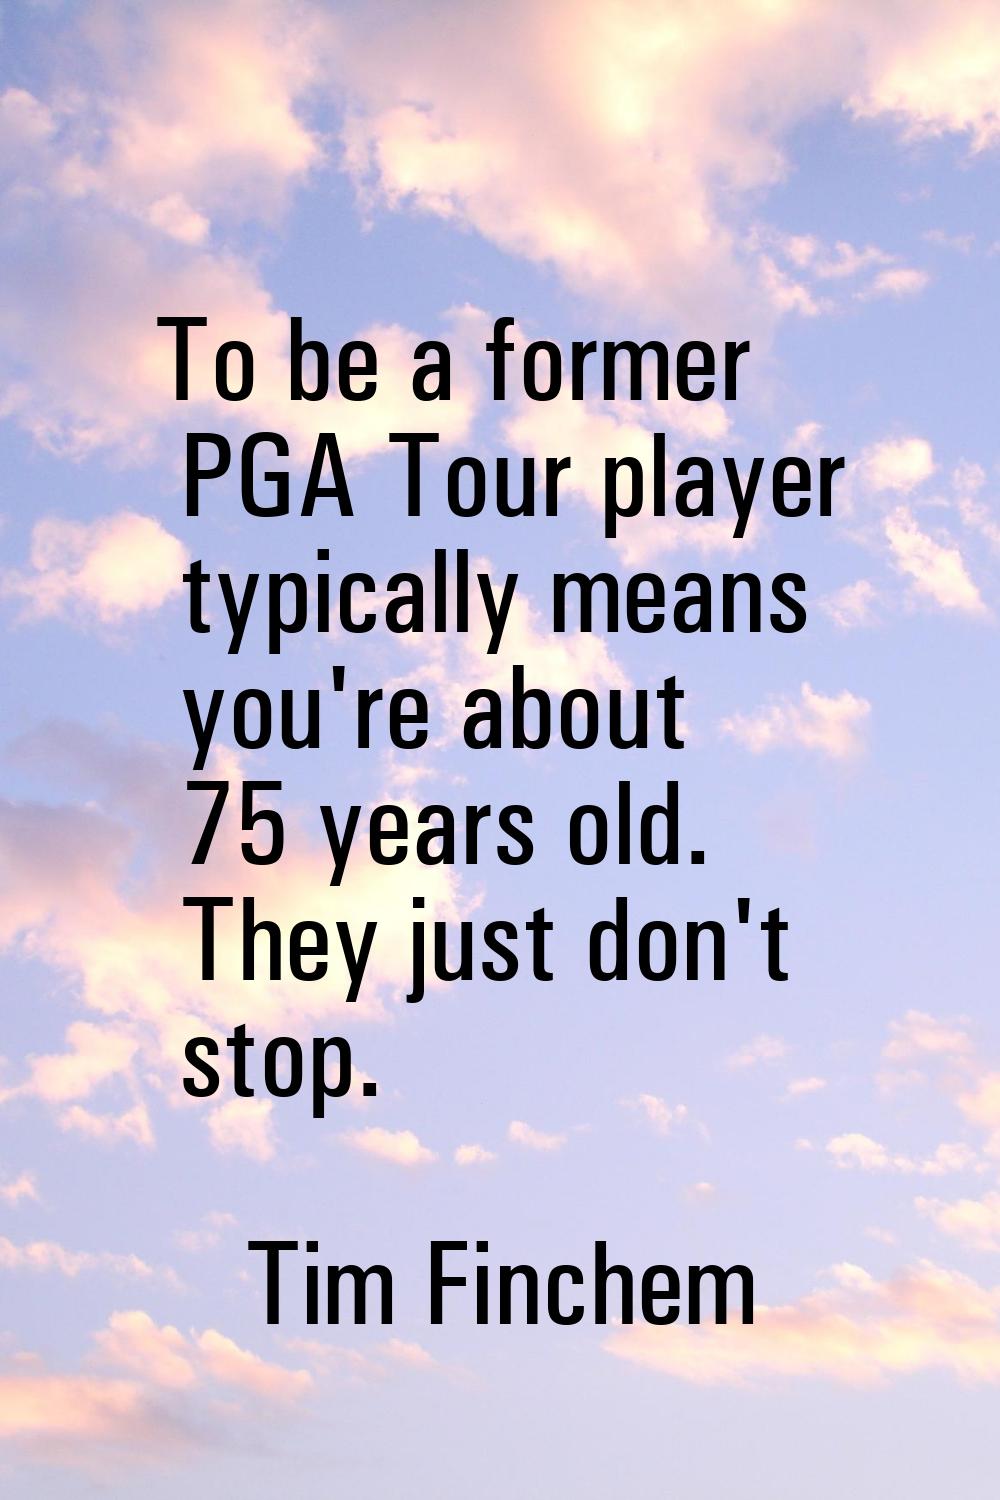 To be a former PGA Tour player typically means you're about 75 years old. They just don't stop.